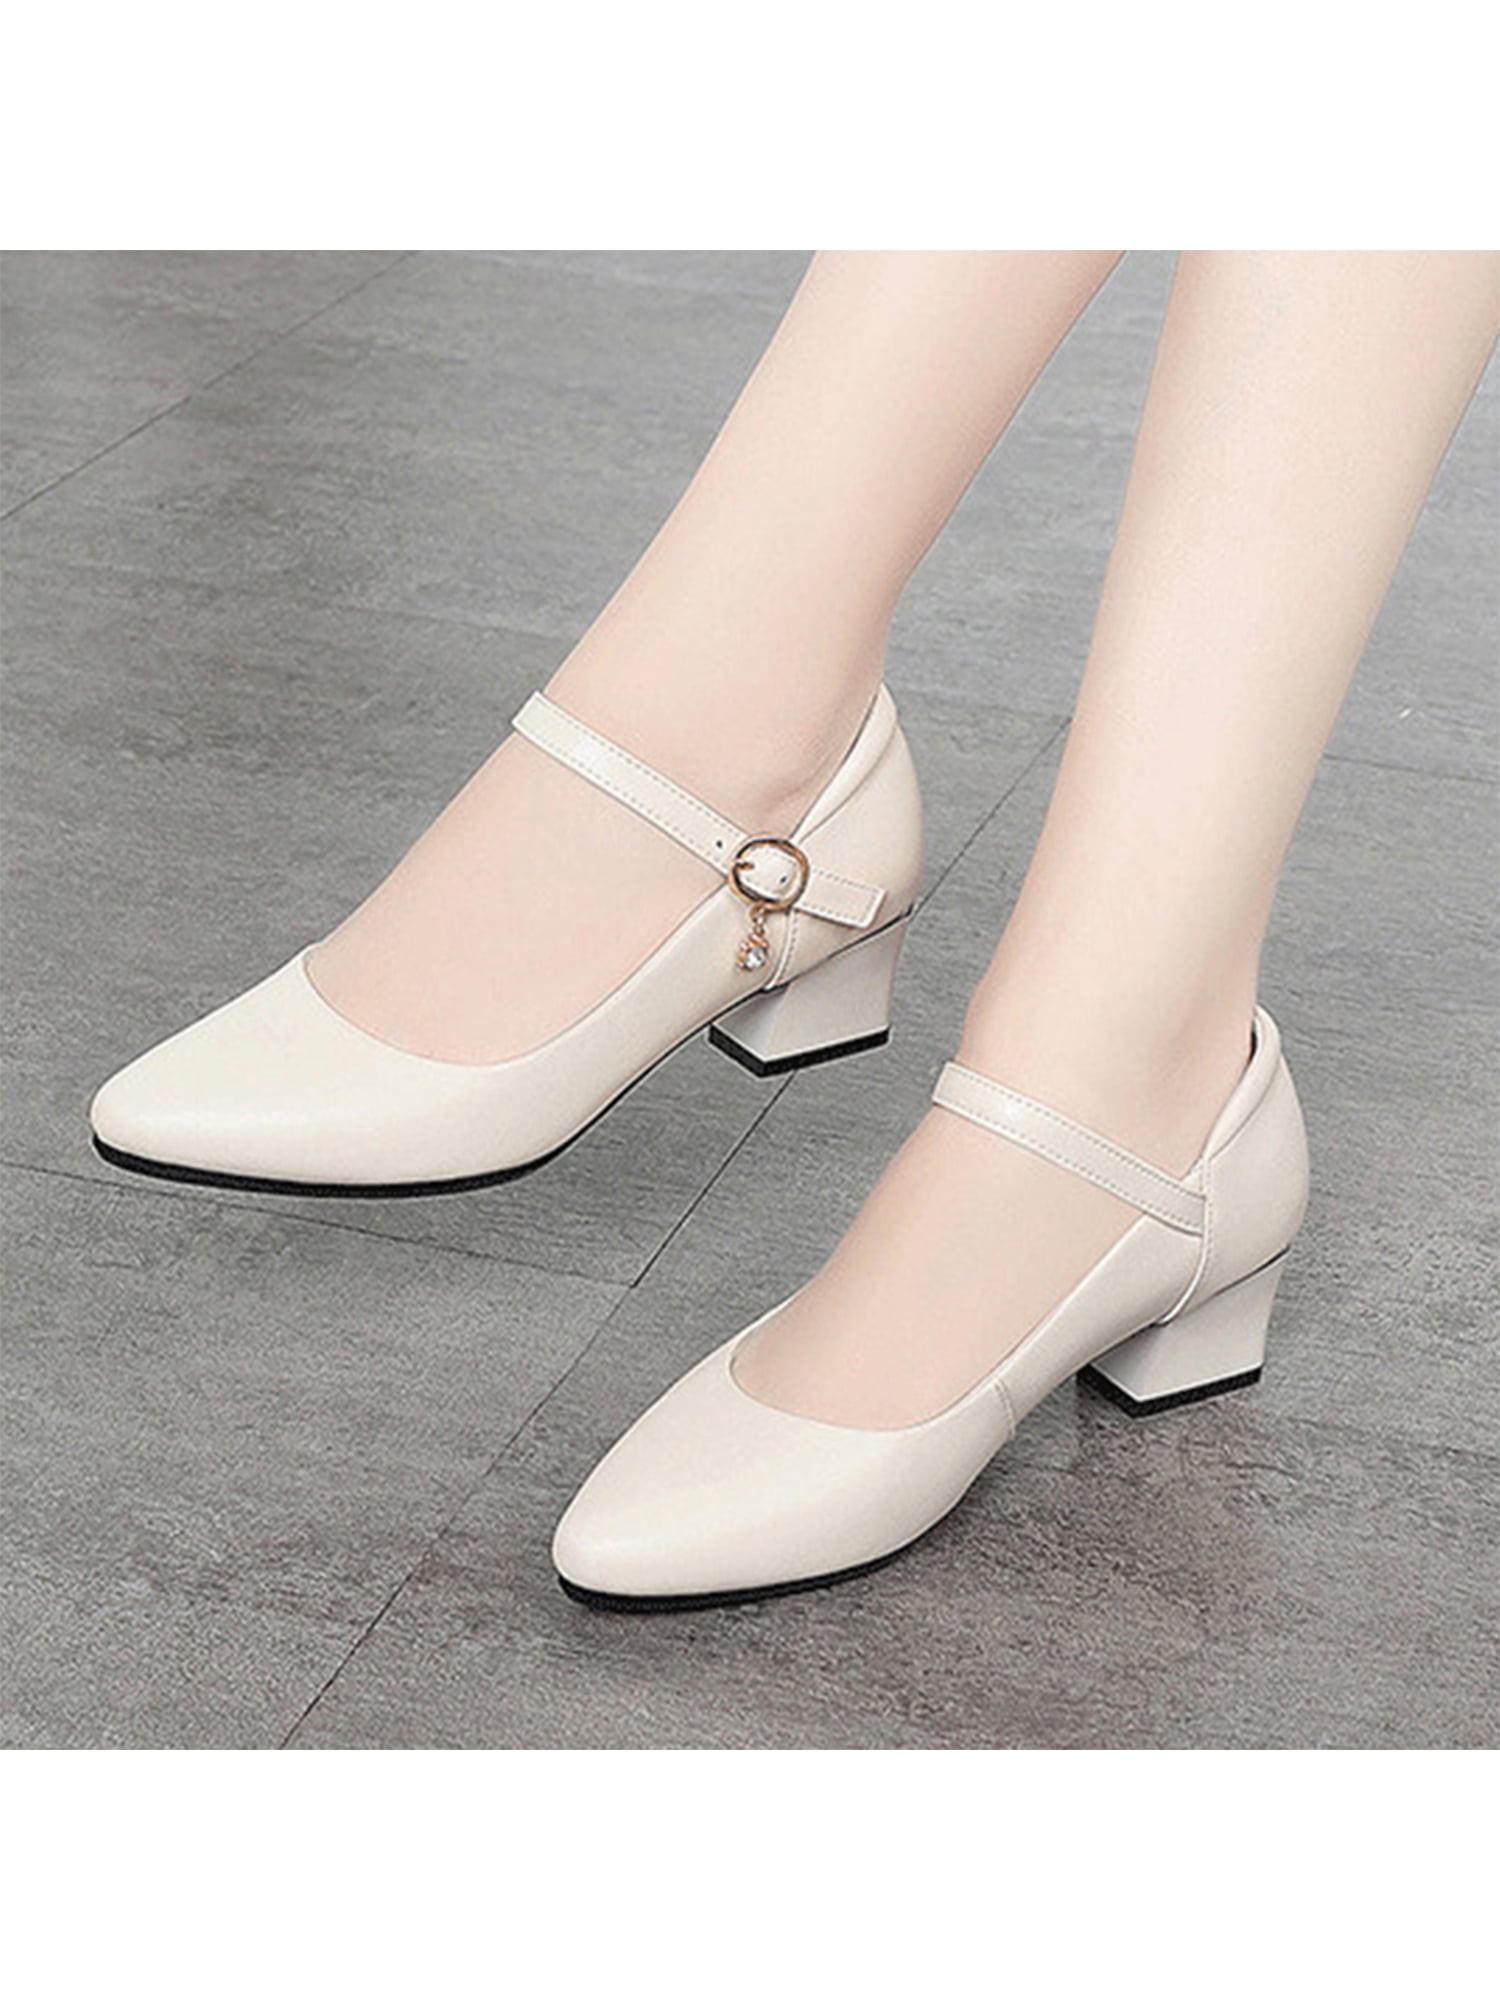 Champagne Satin Block Heel with Ankle Strap - Wedding Shoes, Bridesmaids  Shoes, Bridal Shoes